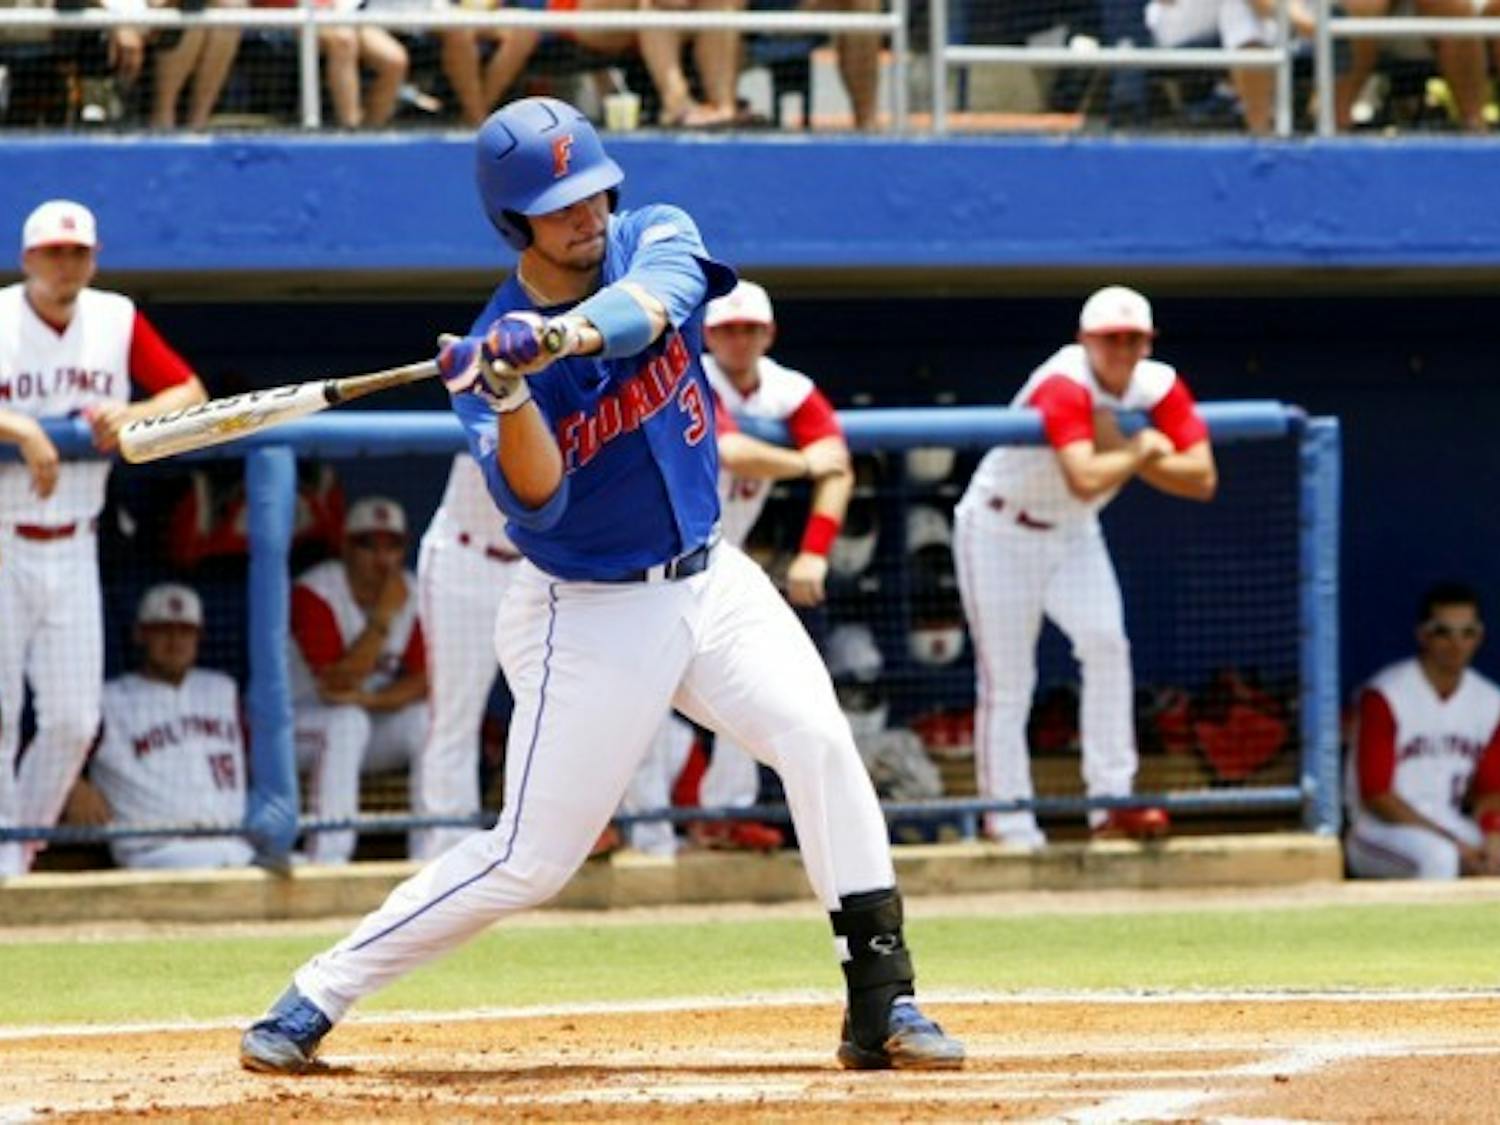 Mike Zunino bats against North Carolina State during the NCAA Super Regional on June 10. In the Gators’ 9-8 victory against the Wolfpack, Zunino went 2 for 4 with a run scored and one RBI. The win sent Florida to the College World Series.